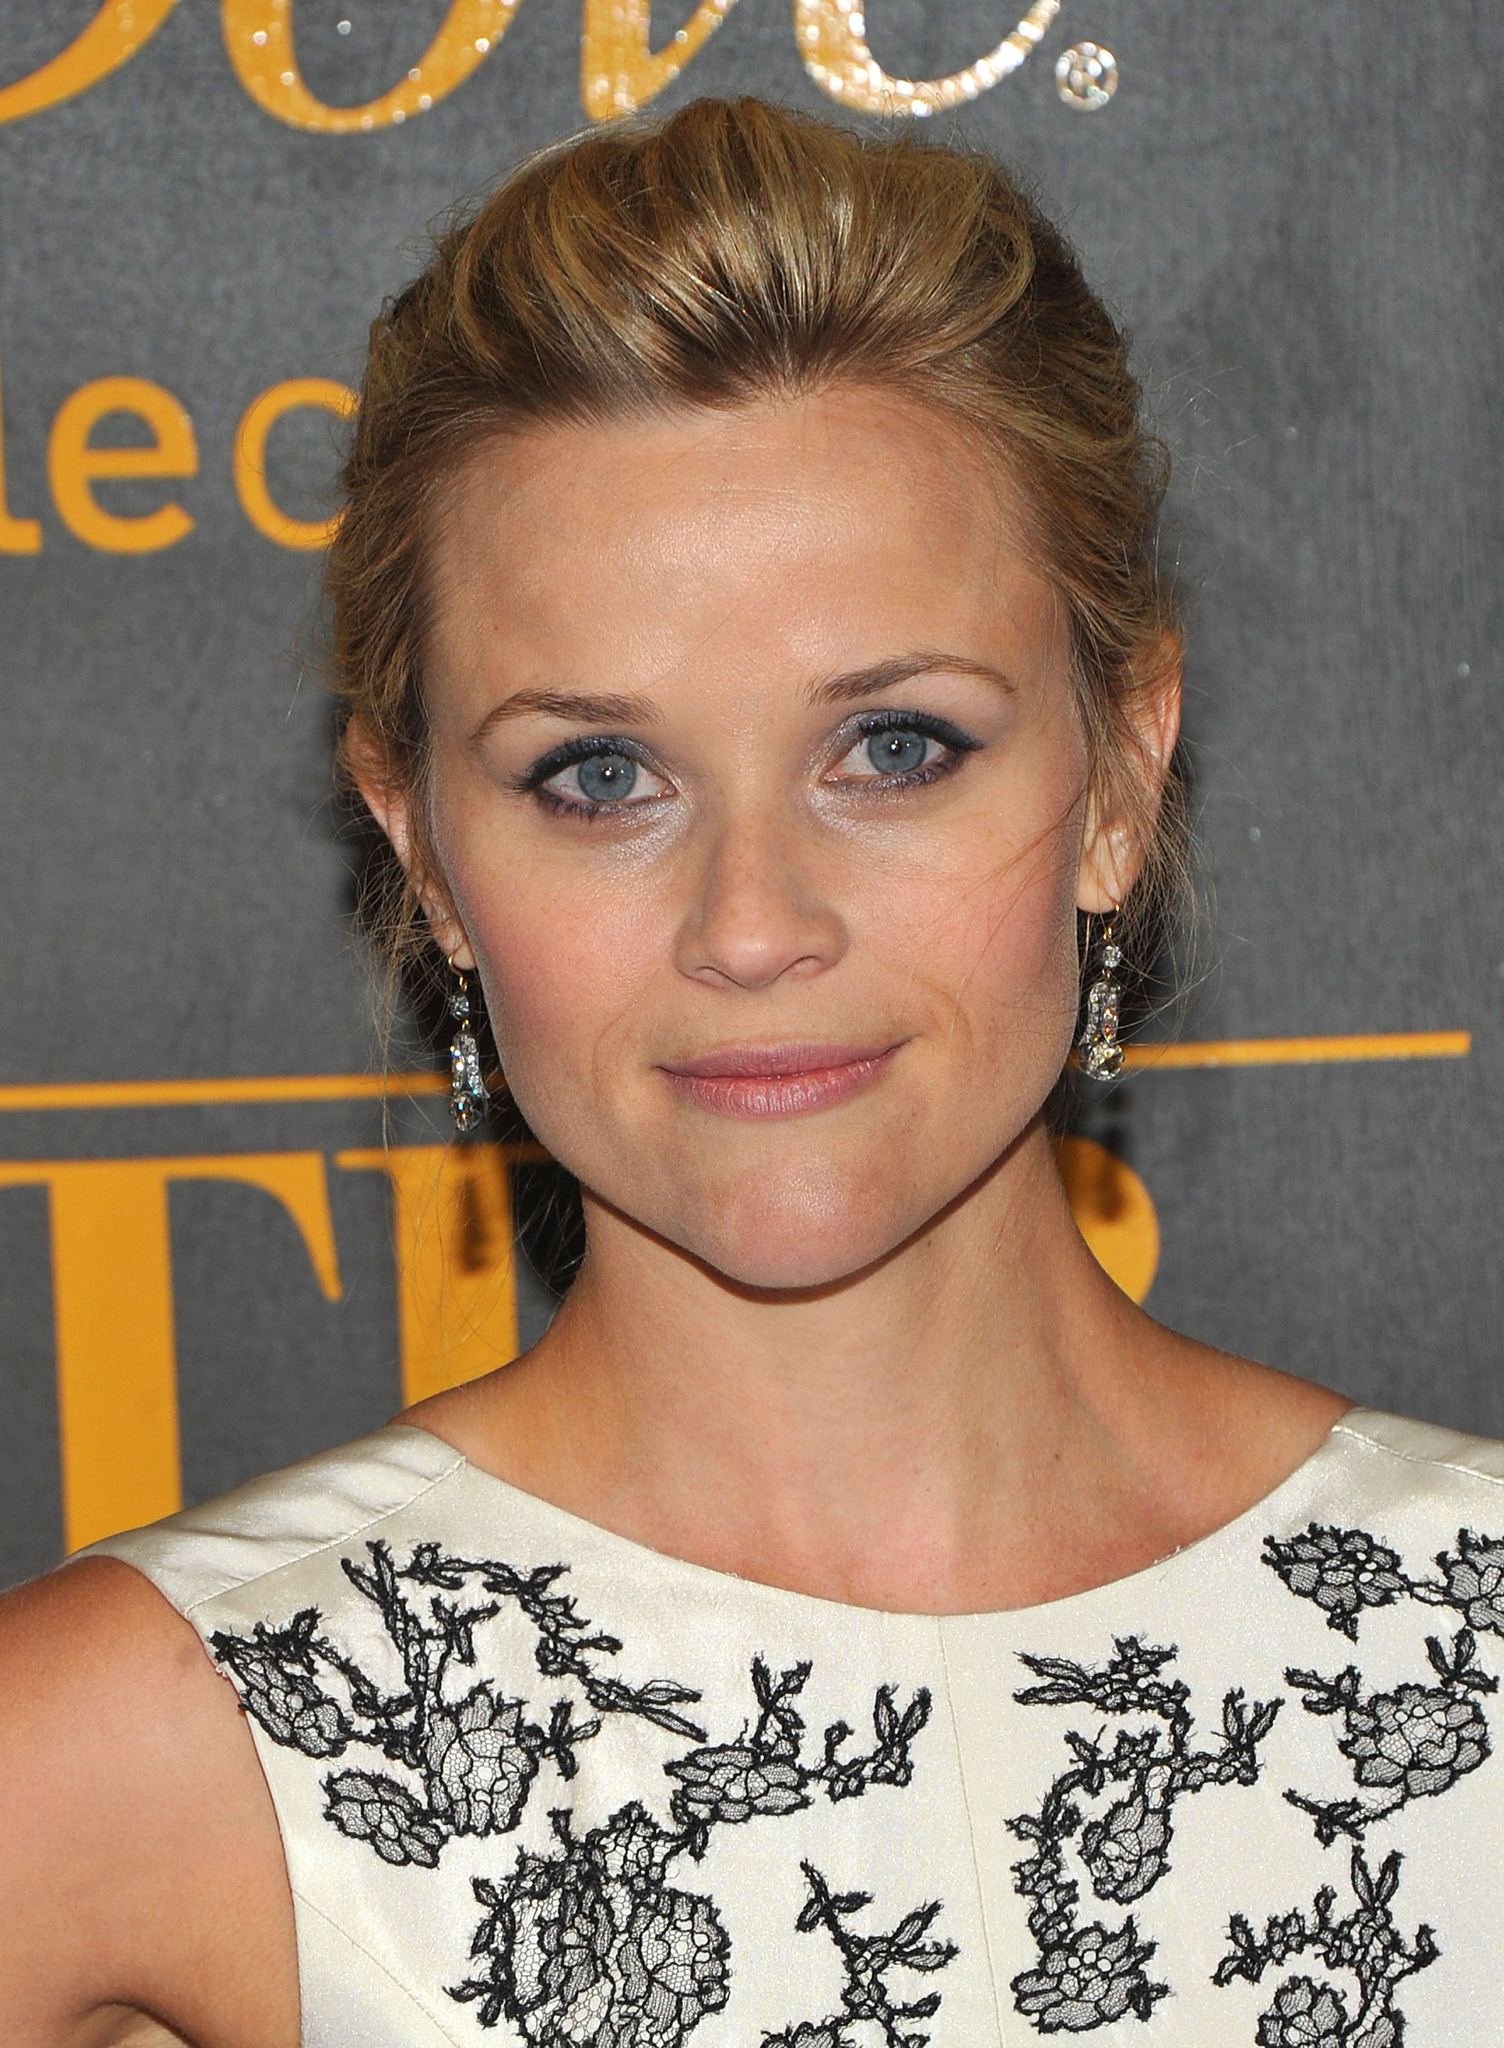 Reese Witherspoon at event of Vanduo drambliams (2011)